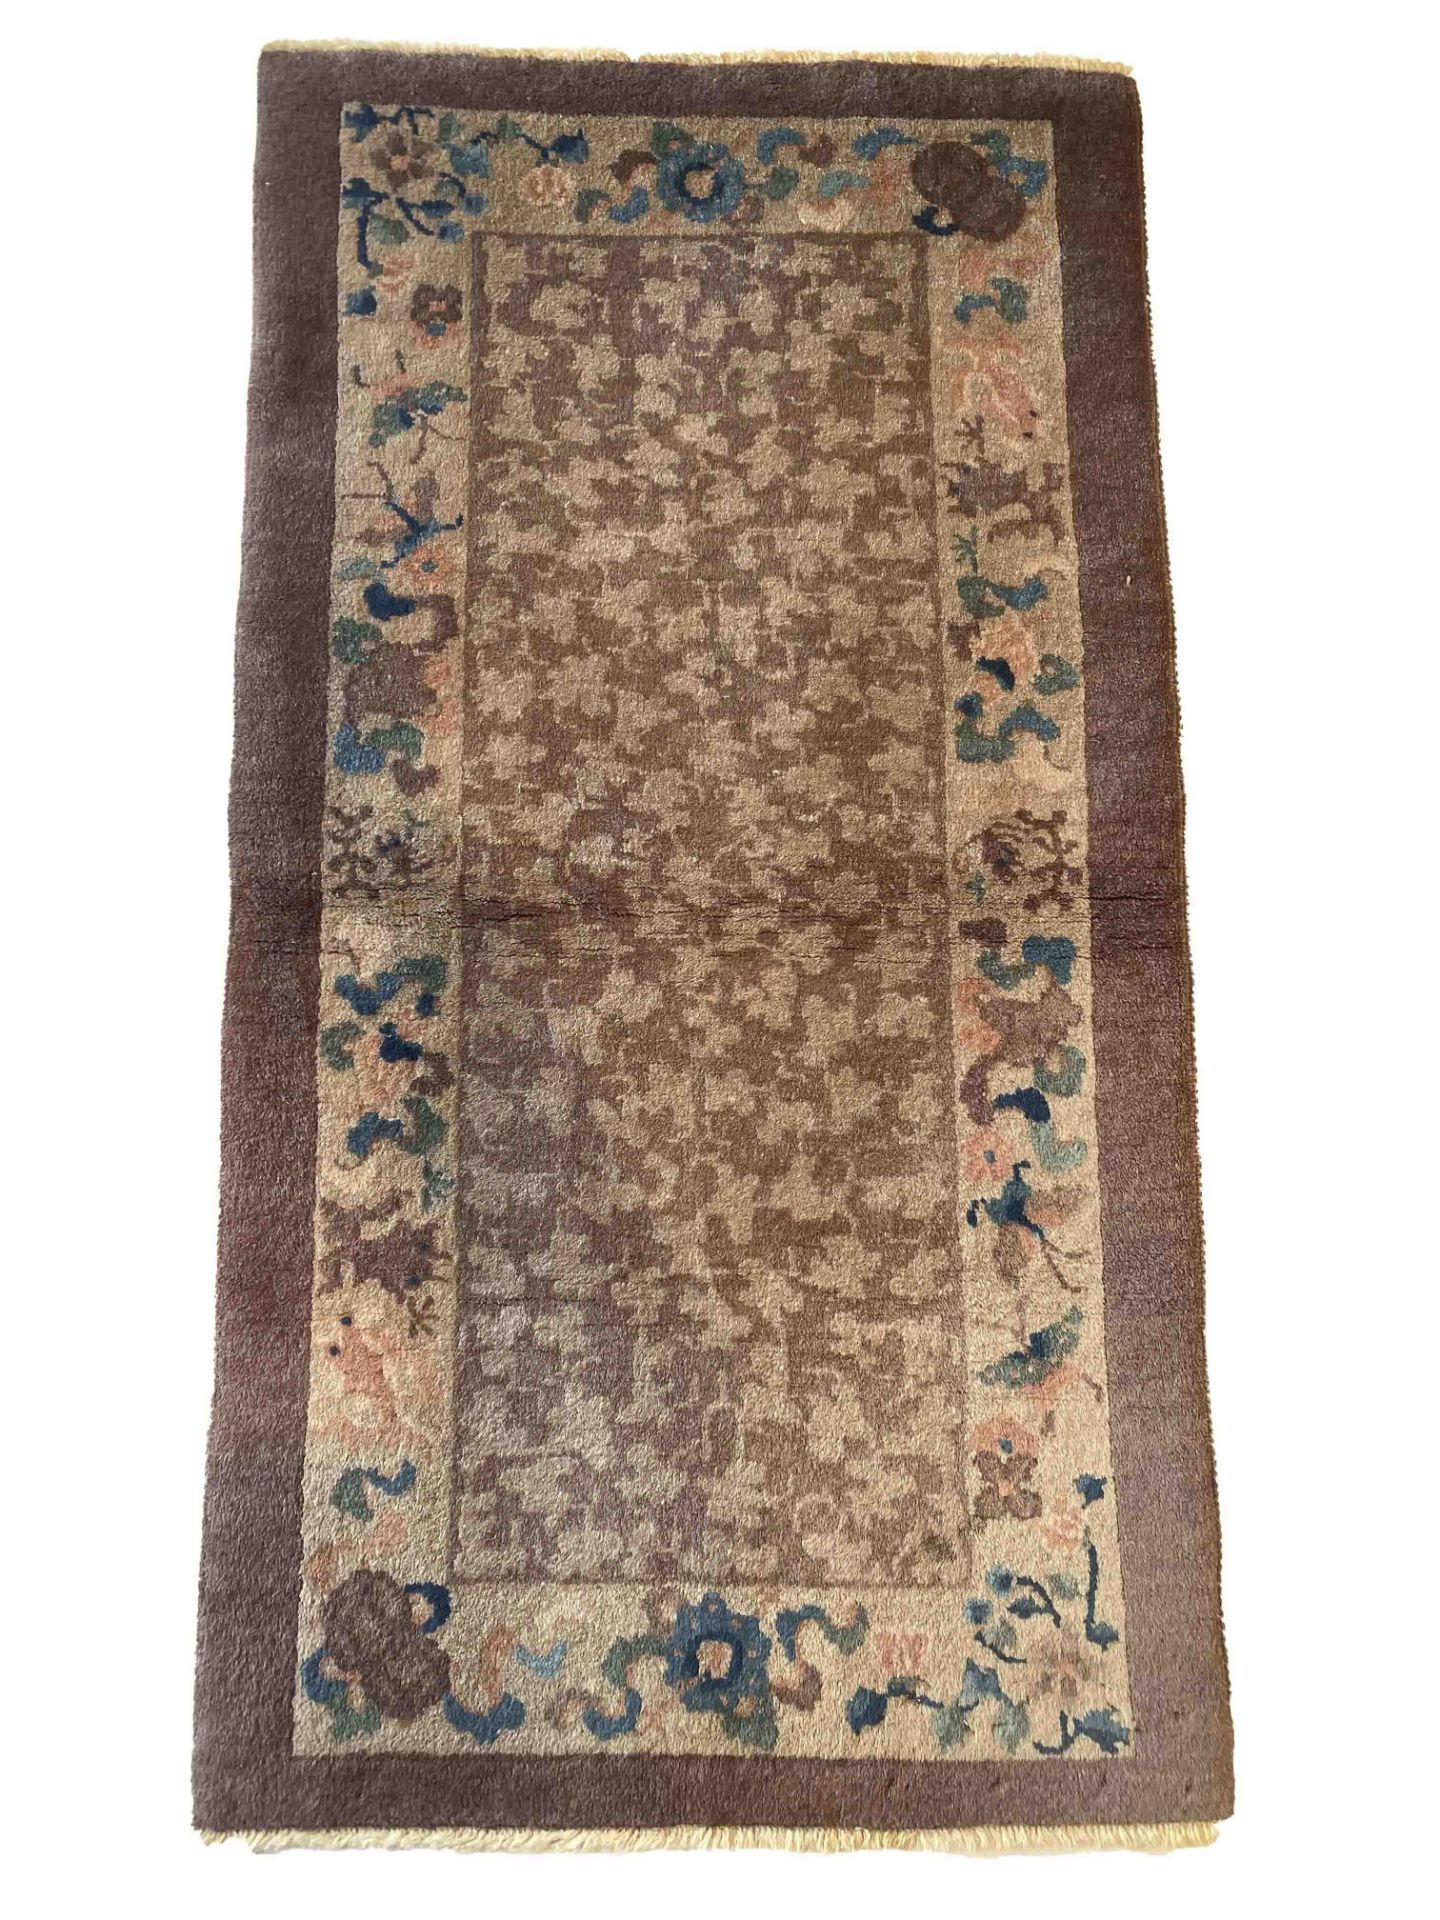 Carpet, China, minor wear, 120 x 64 cm - The carpet can only be viewed and collected at another